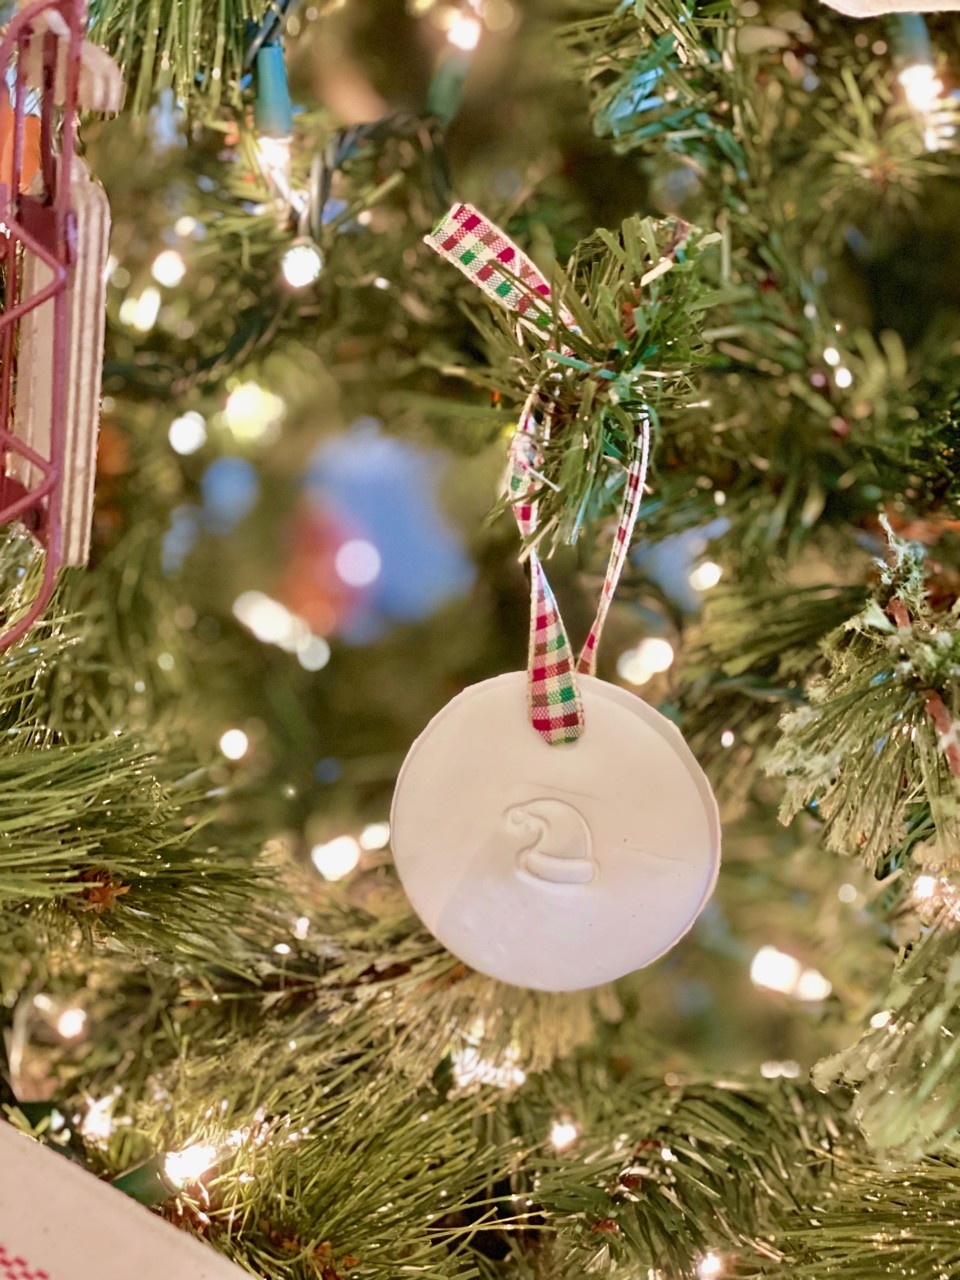 a homemade clay ornament on a Christmas tree